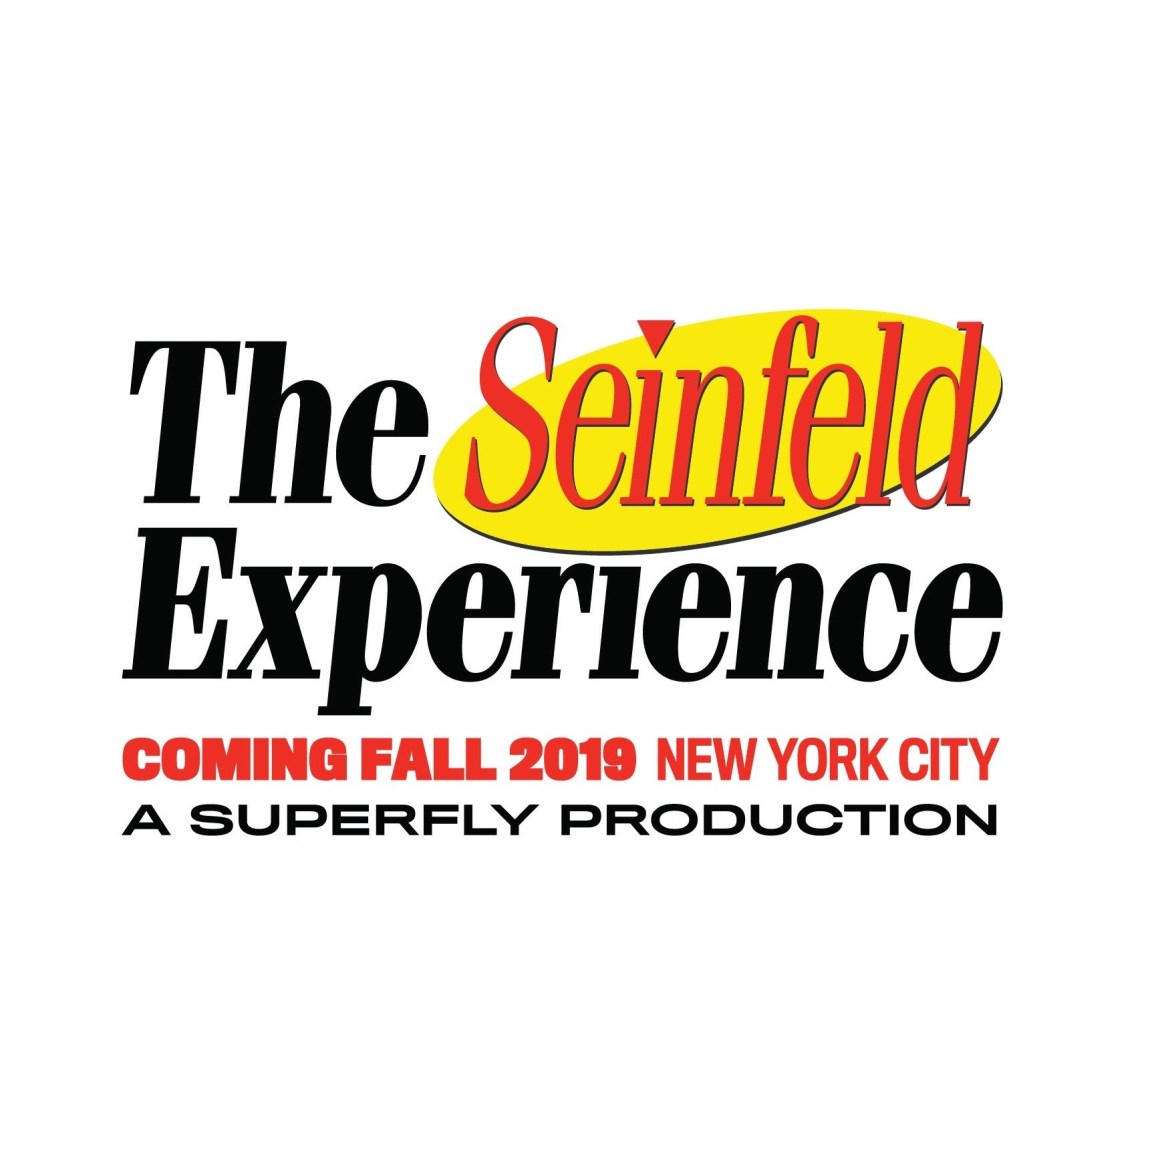 The Seinfeld Experience